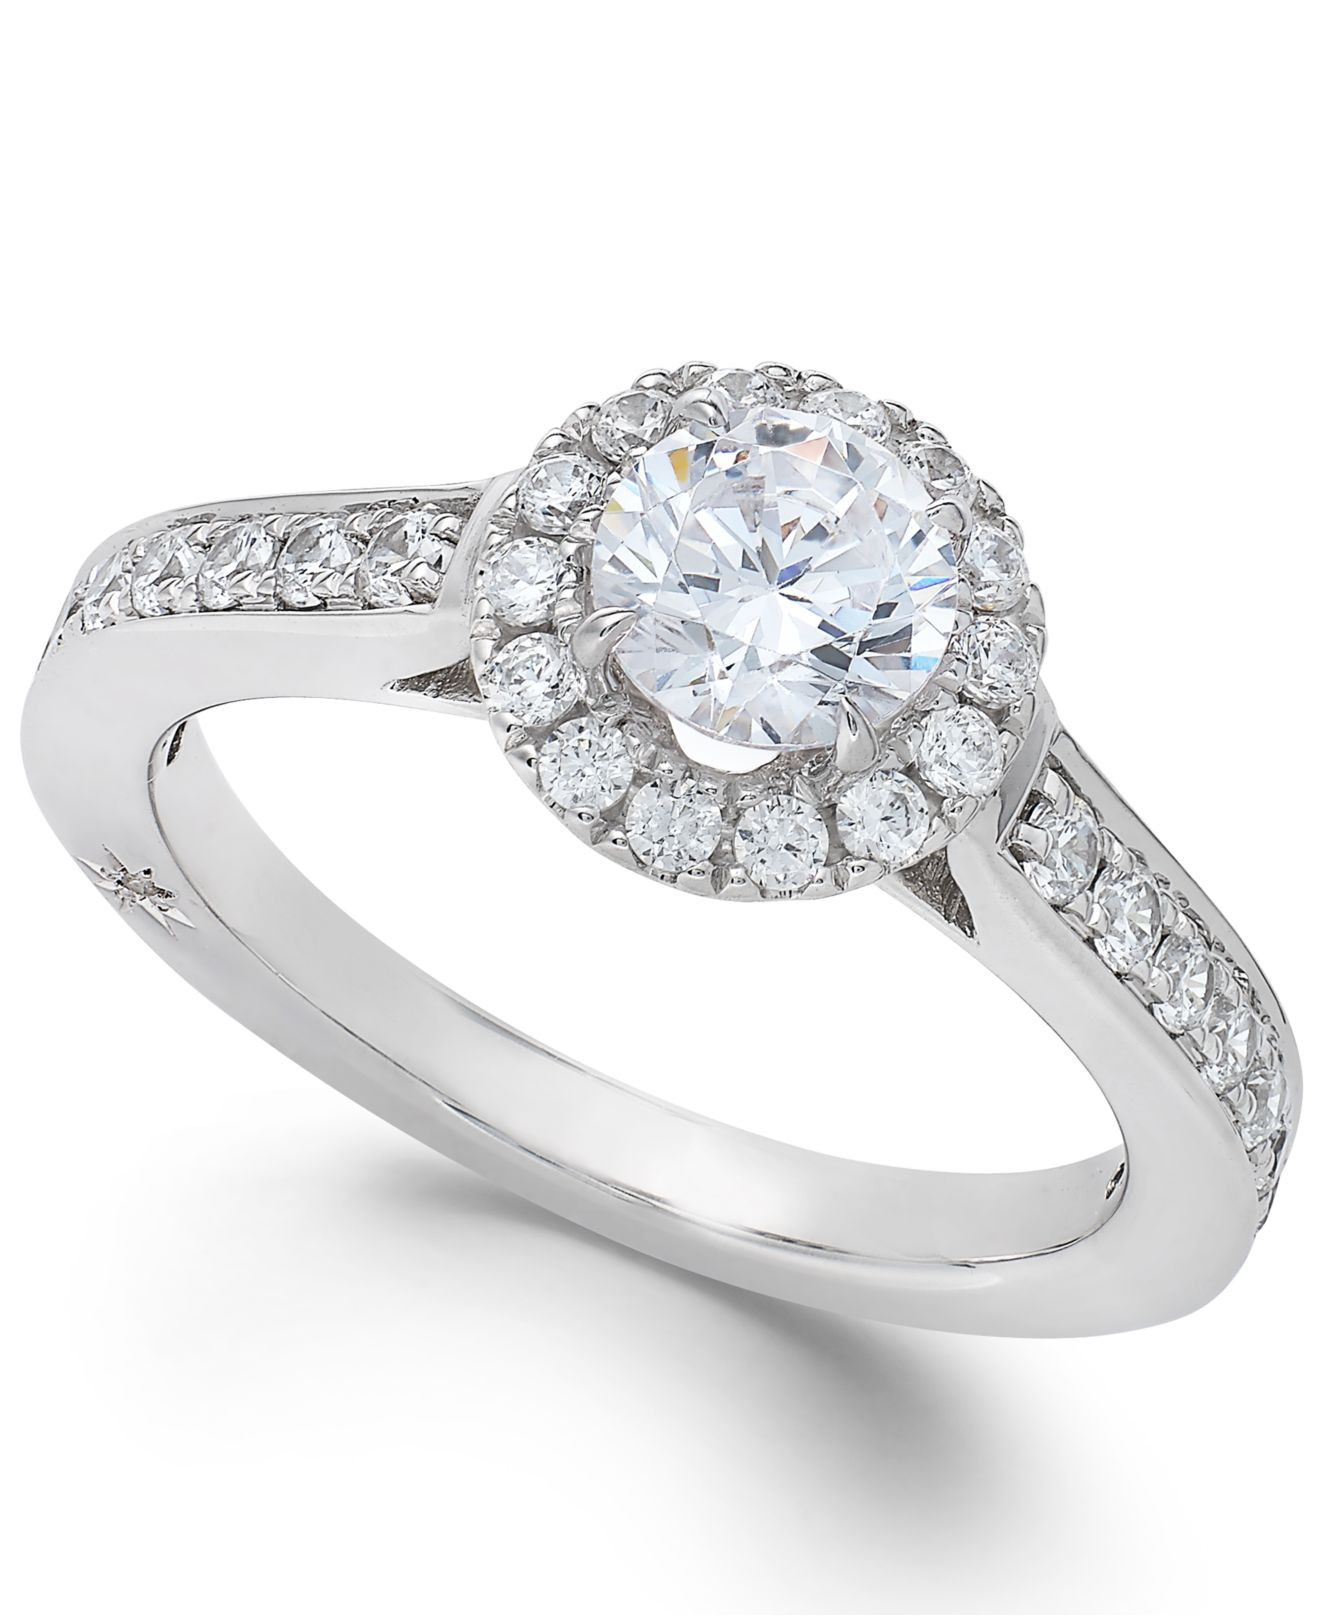 Certified Diamond Engagement Rings
 Marchesa Estate Halo By Certified Diamond Engagement Ring